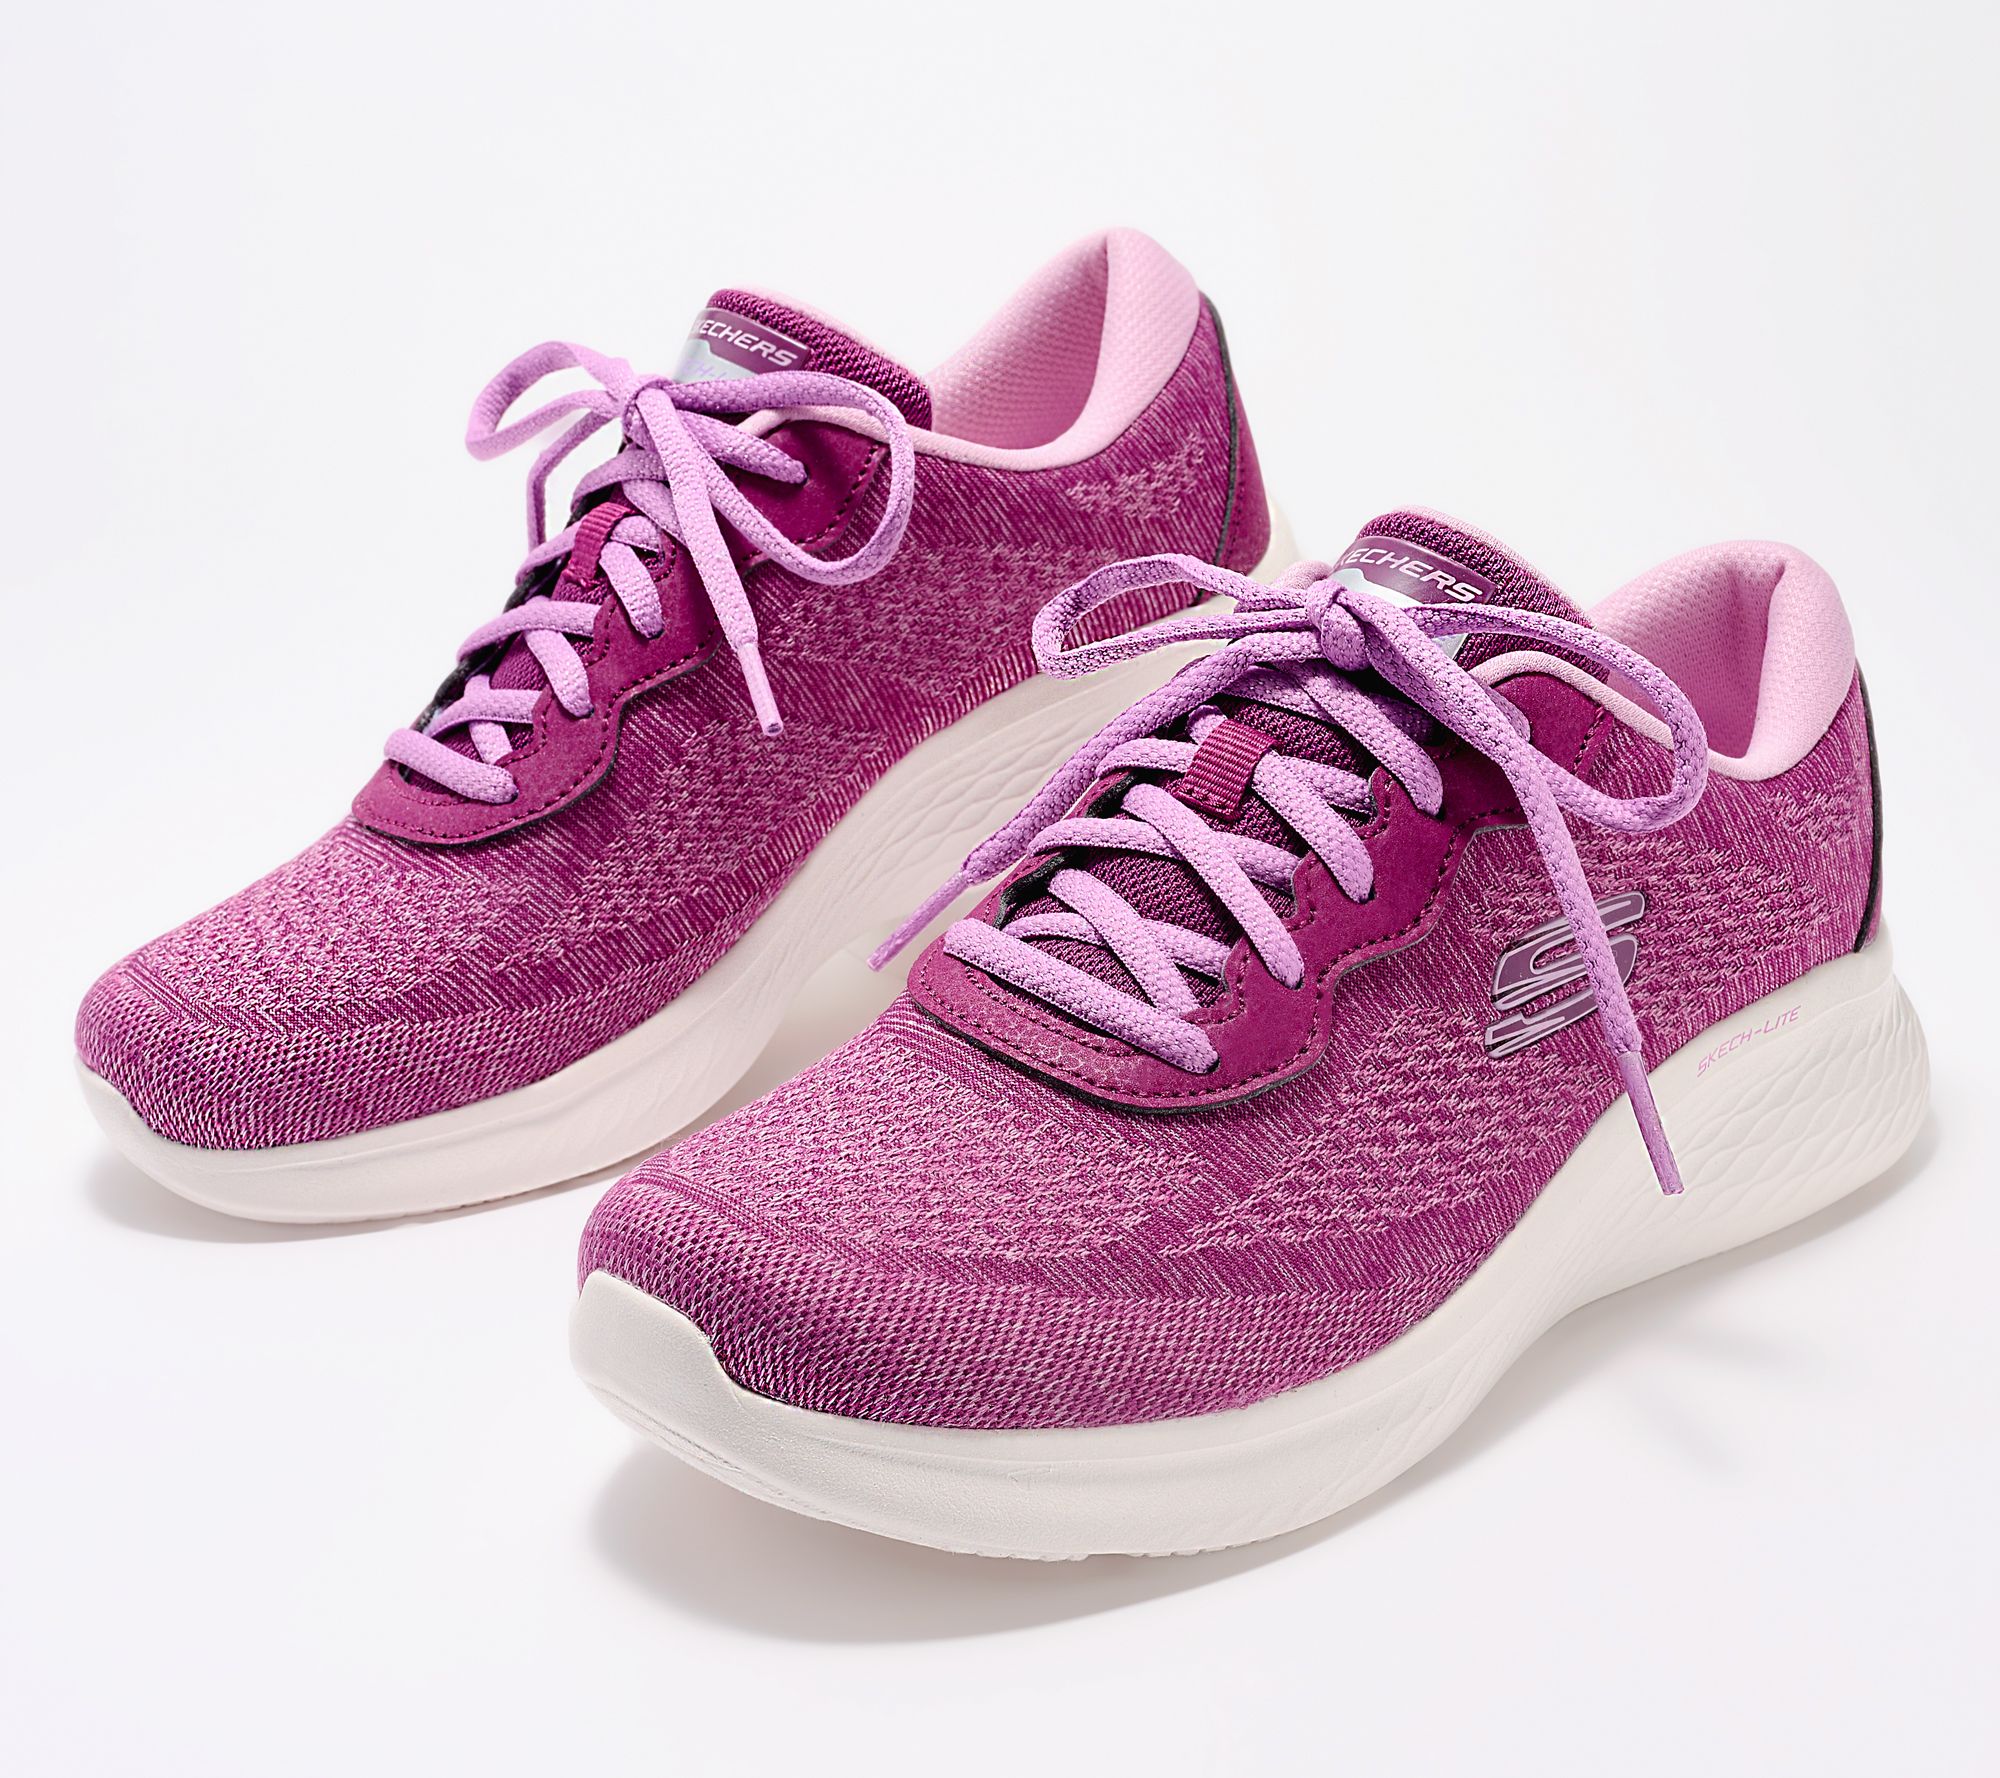 Skechers sale: Save up to 30% on sneakers at QVC